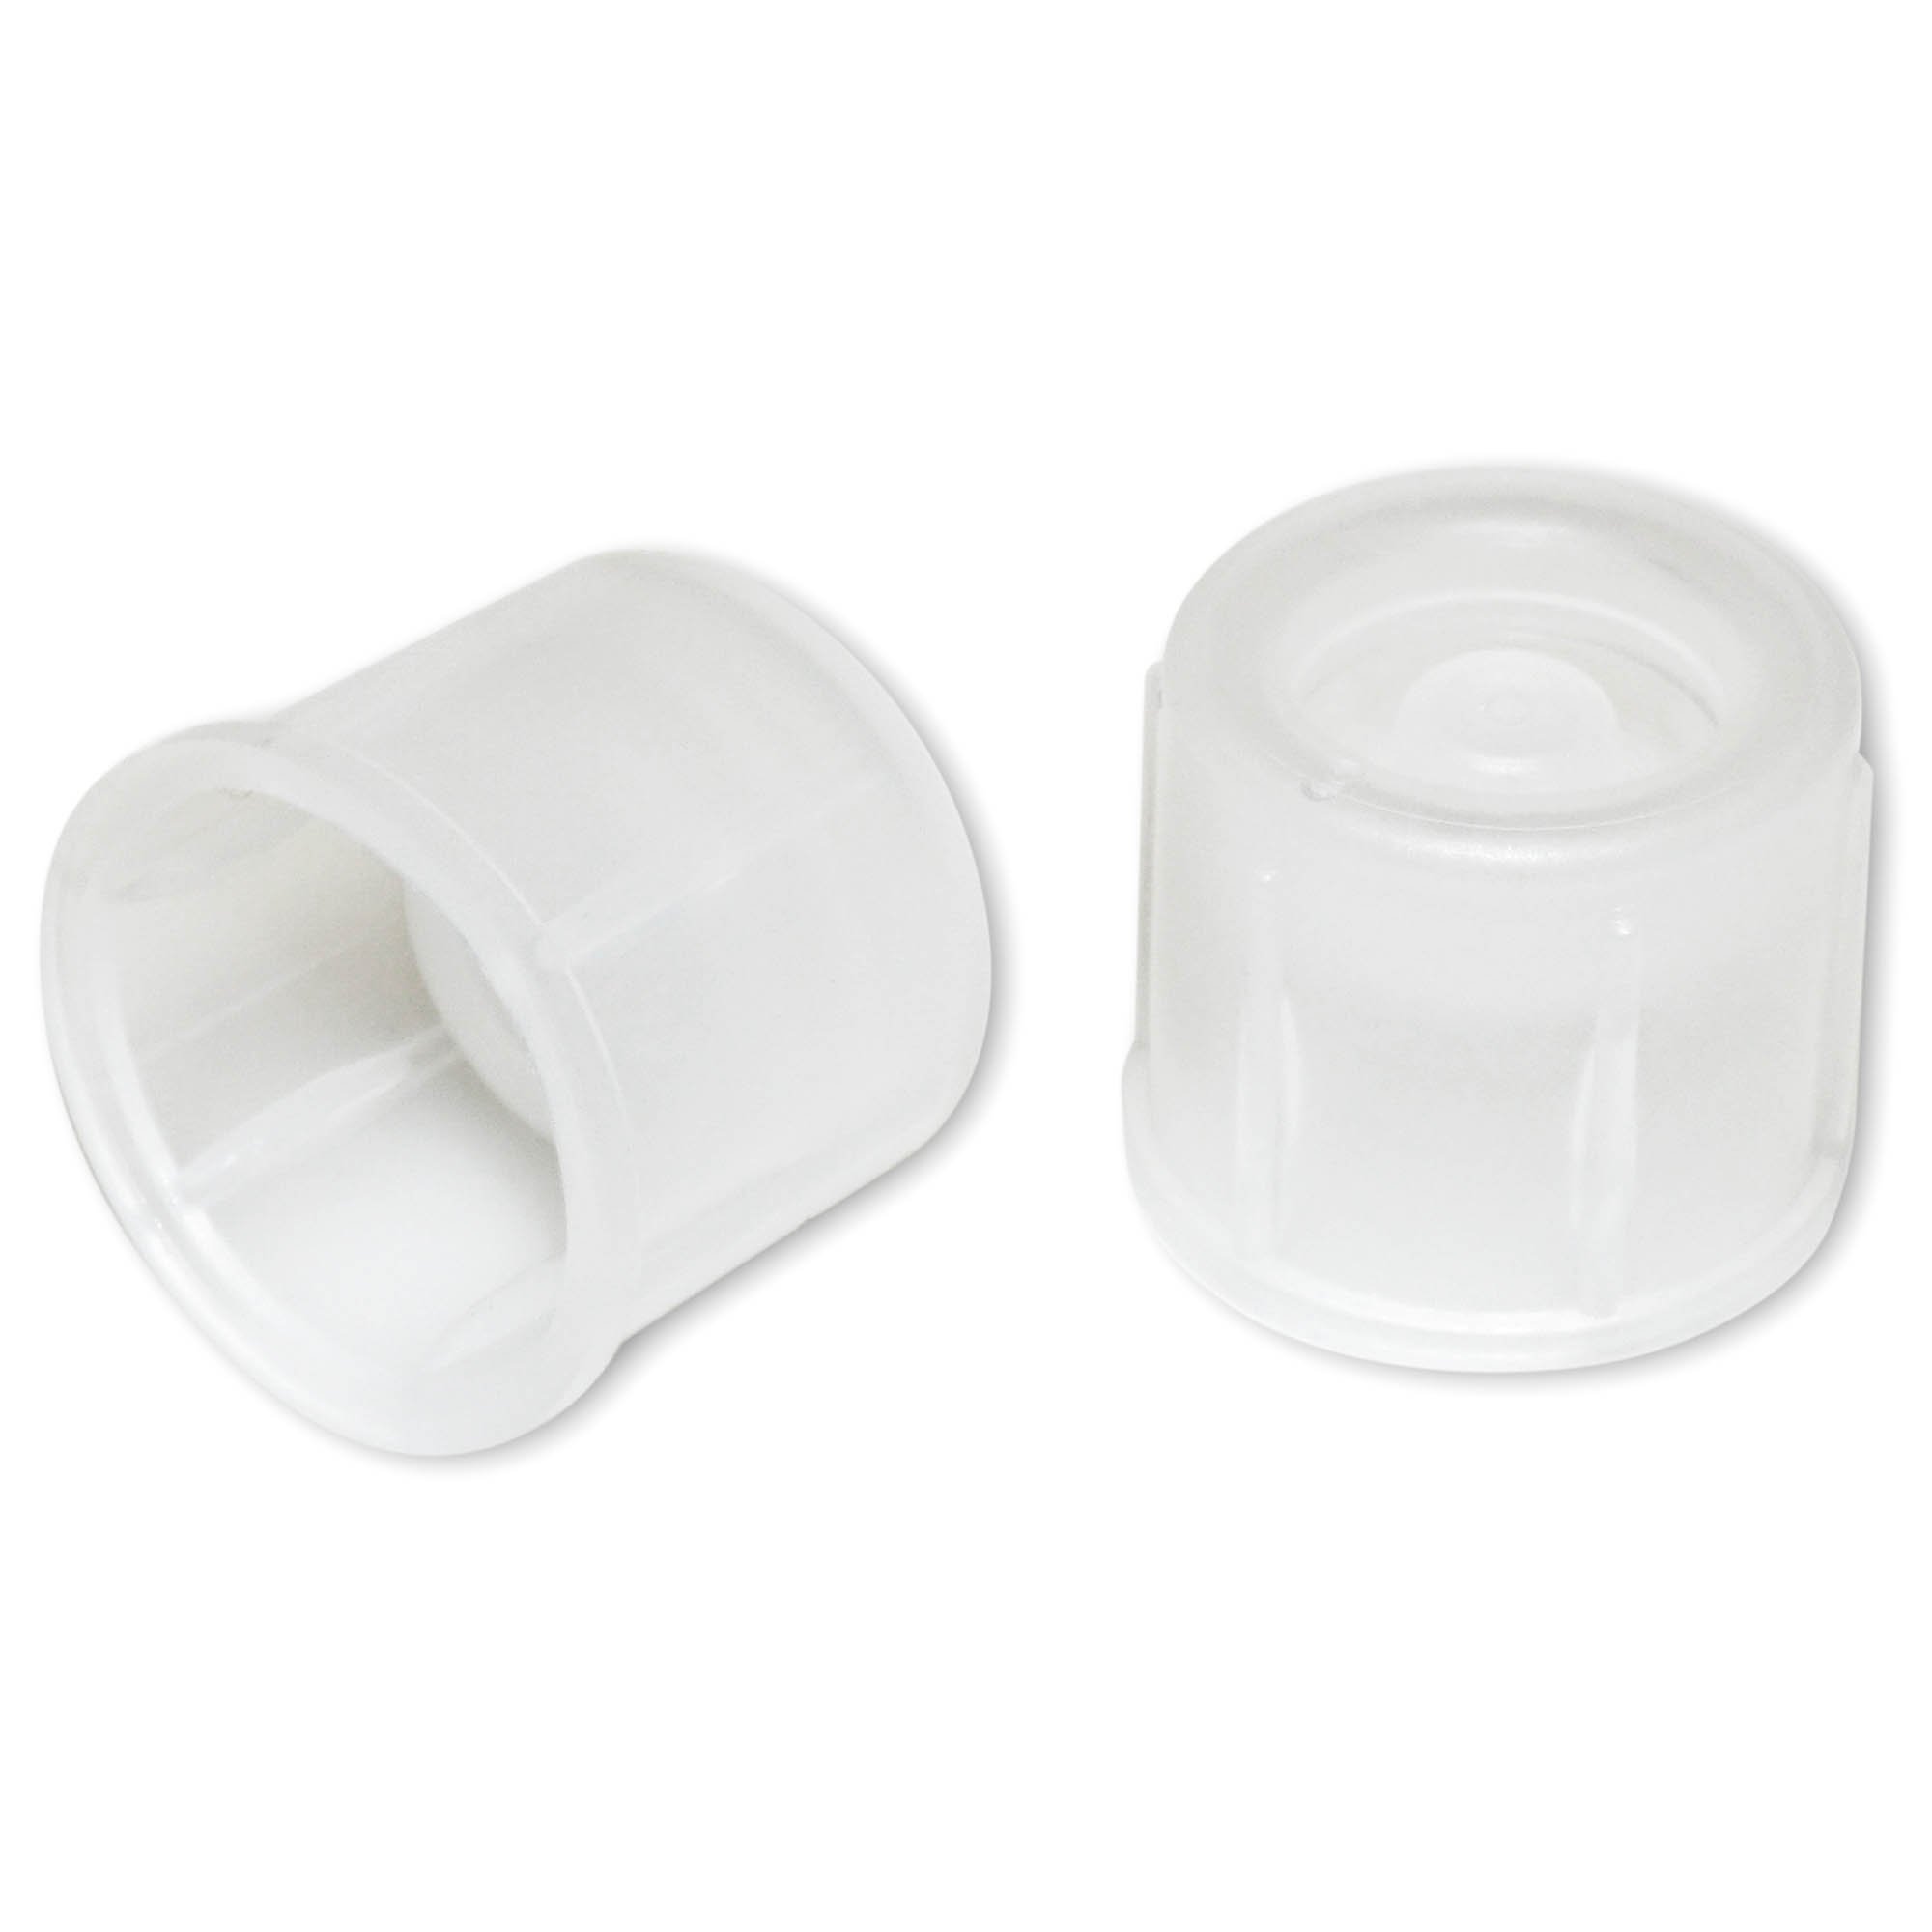 Dual Position Standard Cap for 12mm x 75mm FlowTubes - Pack of 1000 (8 Bags of 125/Bag)